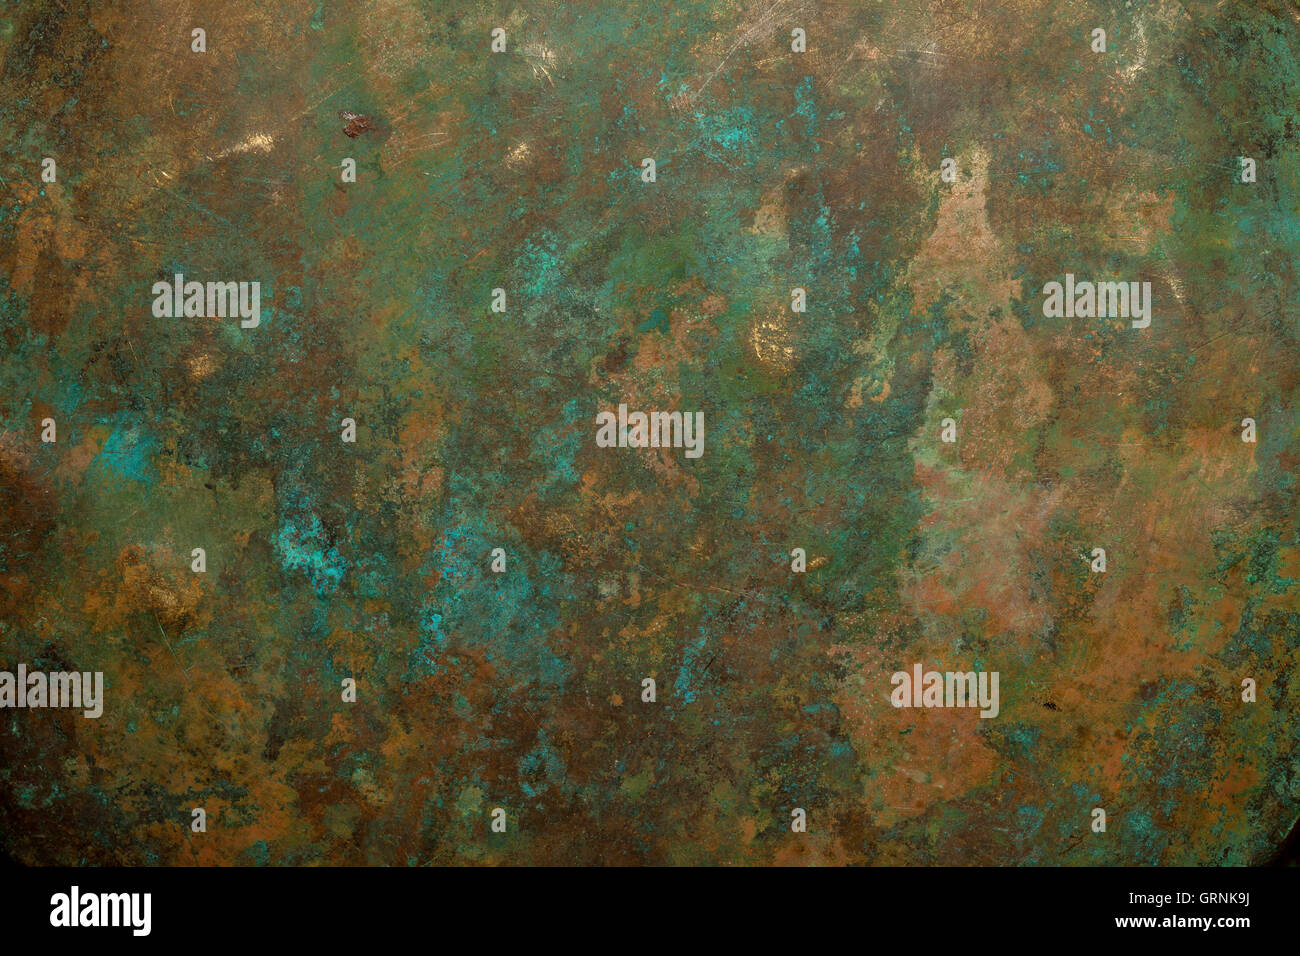 Background image of old copper vessel texture. Stock Photo